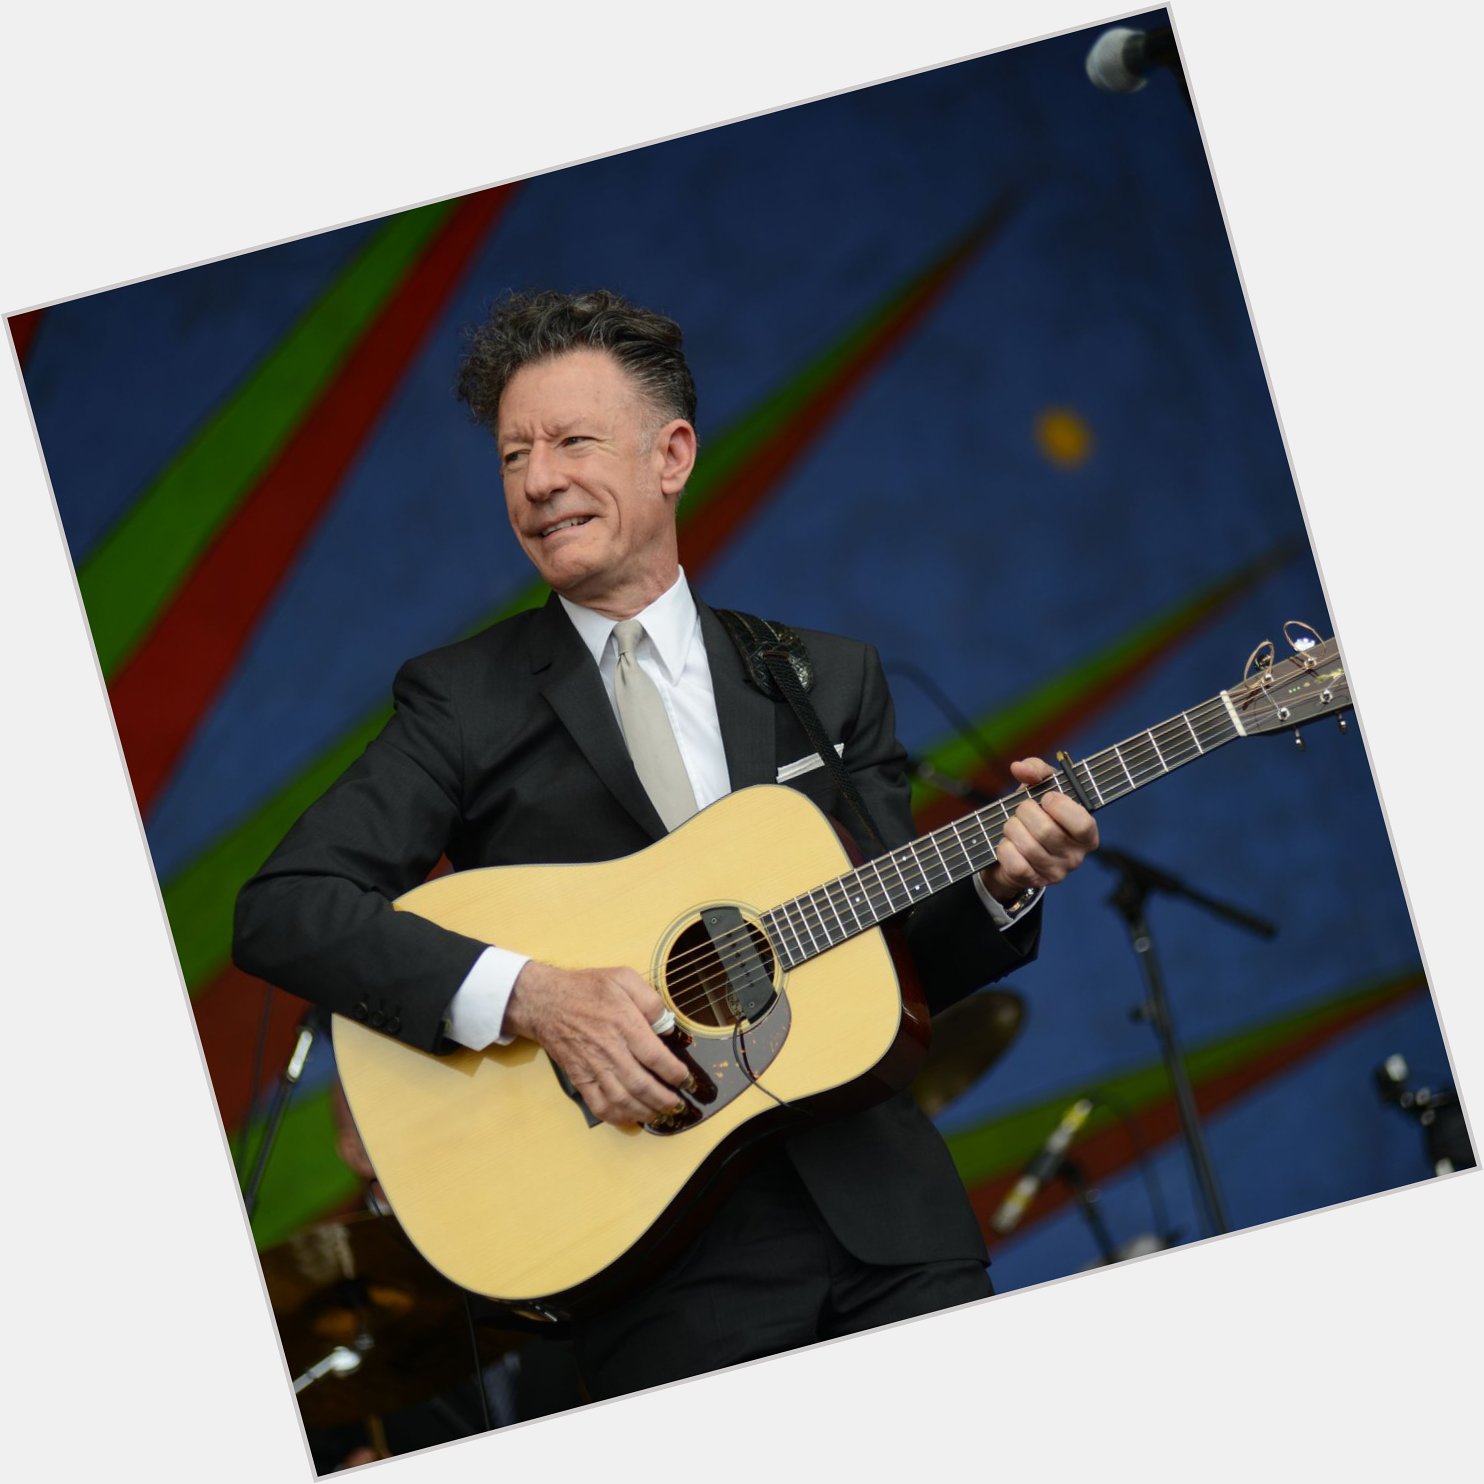 Happy Birthday Lyle Lovett, 64 years old today. Working on one of his lovely songs at the moment If I Had A Boat 